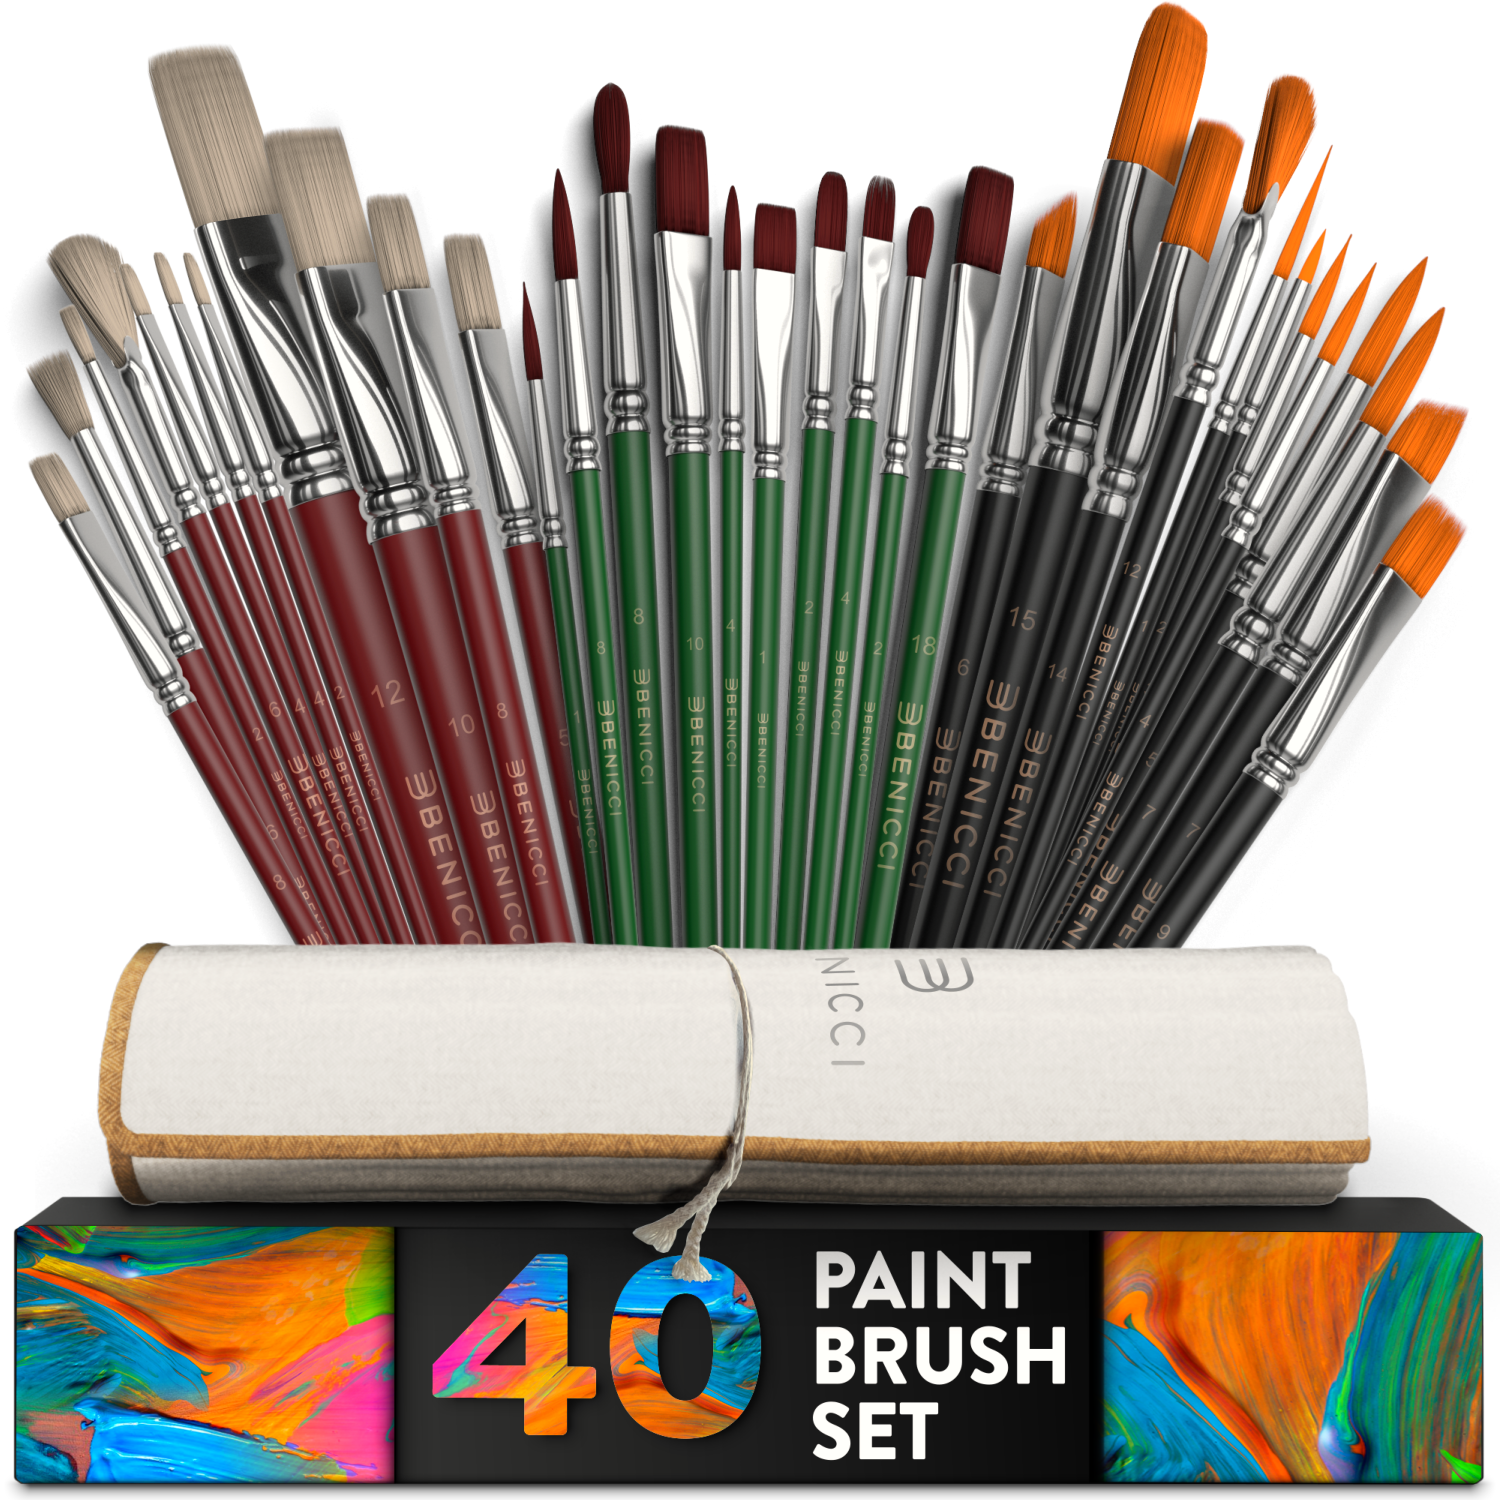 16 Piece Long Handle Oil/Acrylic Brush Painting Set with Black